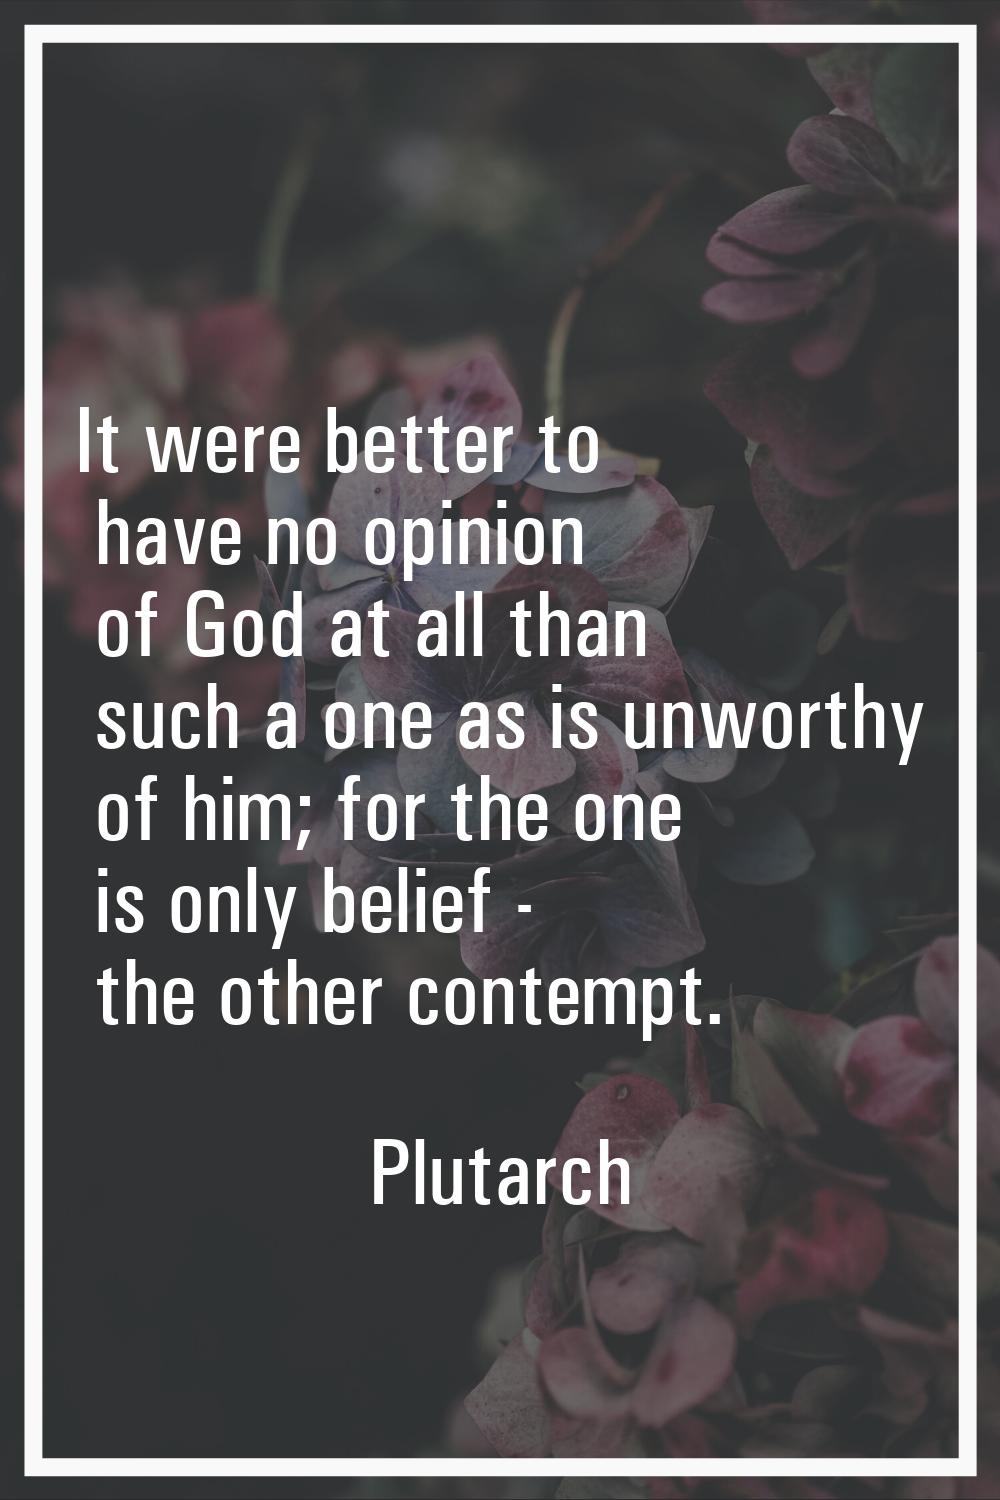 It were better to have no opinion of God at all than such a one as is unworthy of him; for the one 